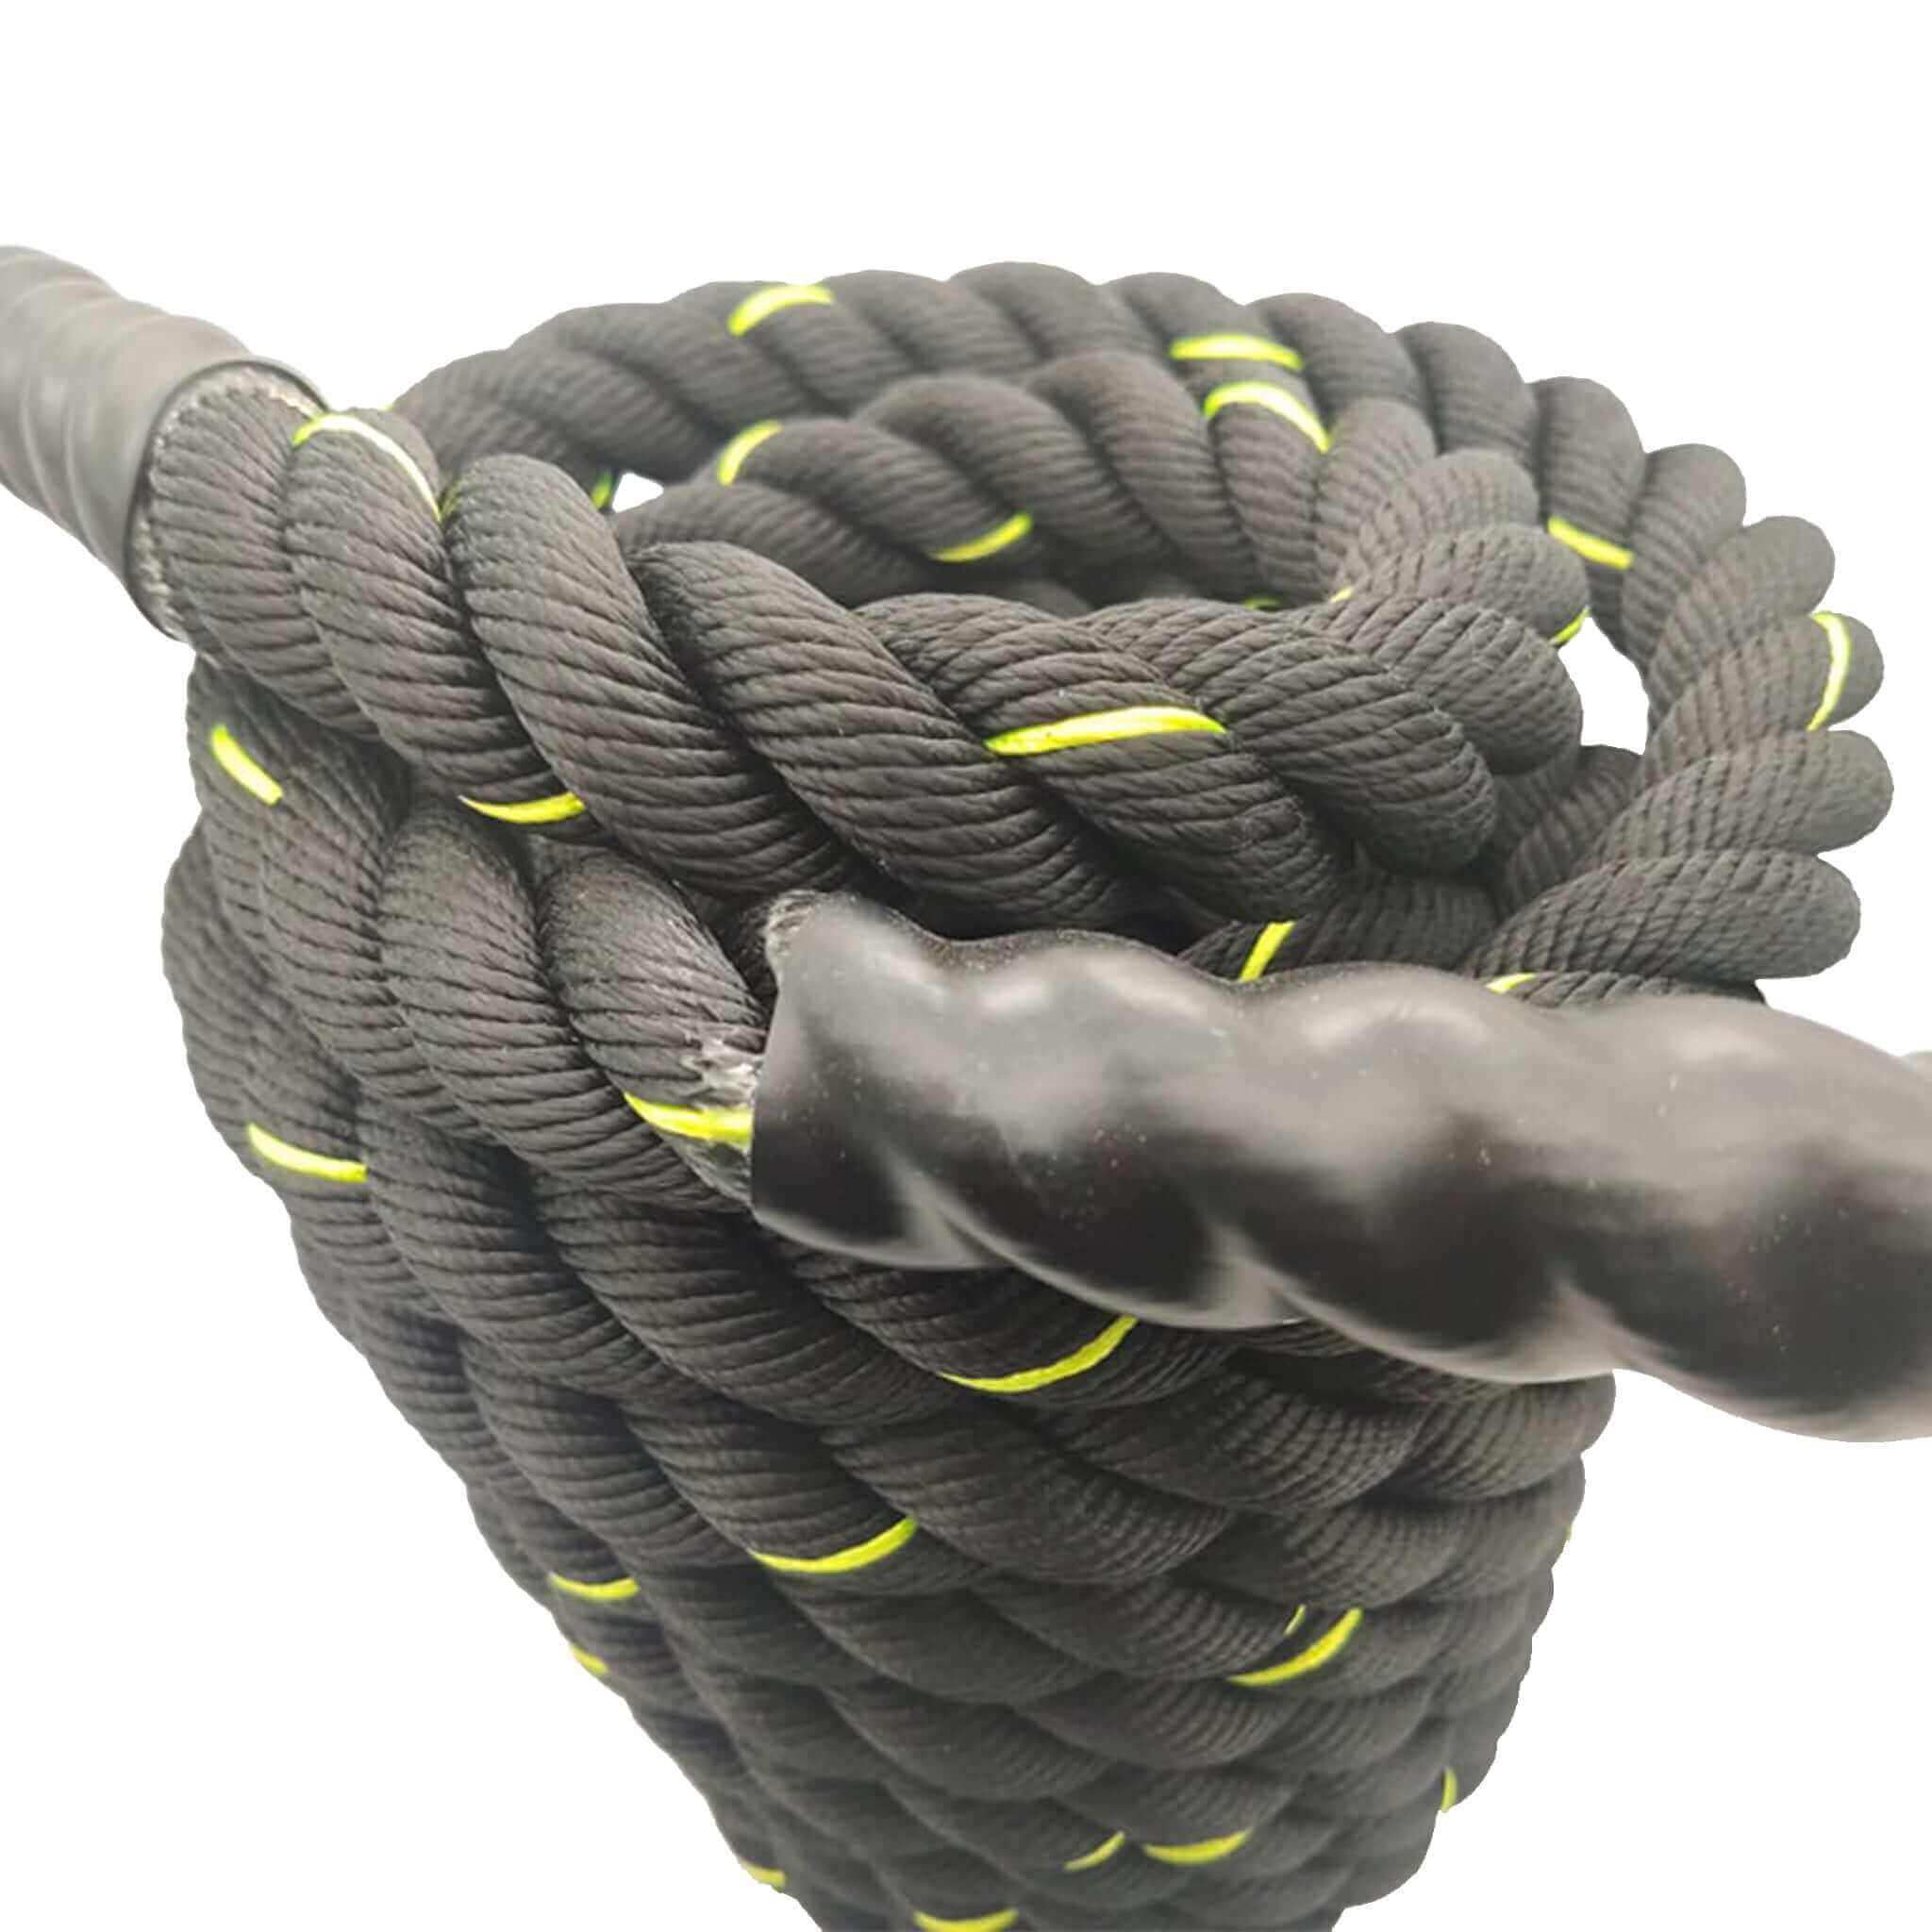 9m 38mm Battle Ropes Nylon Thick Heavy Duty Exercise Training Rope | INSOURCE